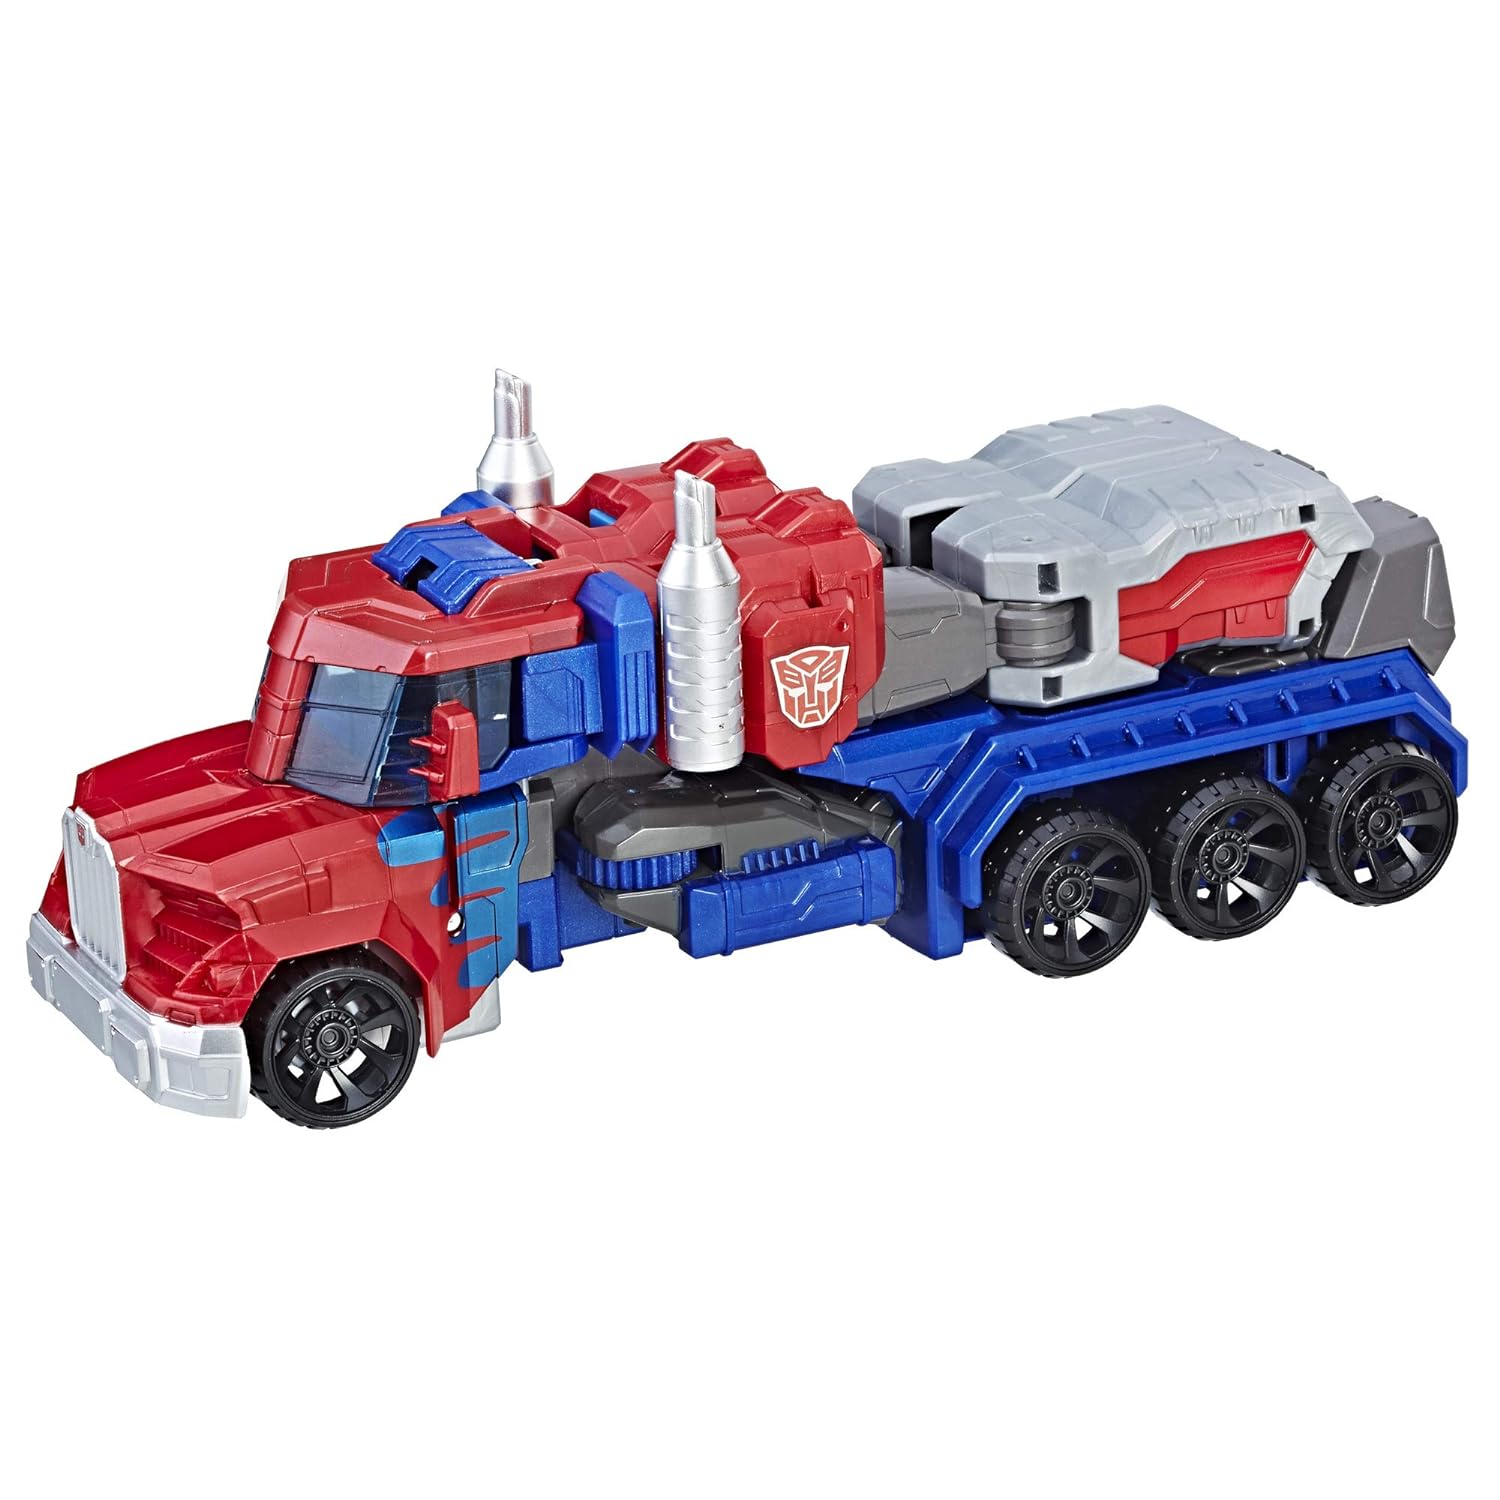 Hasbro Transformers Toys Heroic Optimus Prime Action Figure - Timeless Large-Scale Figure, Changes Into Toy Truck - Toys For Kids 6…